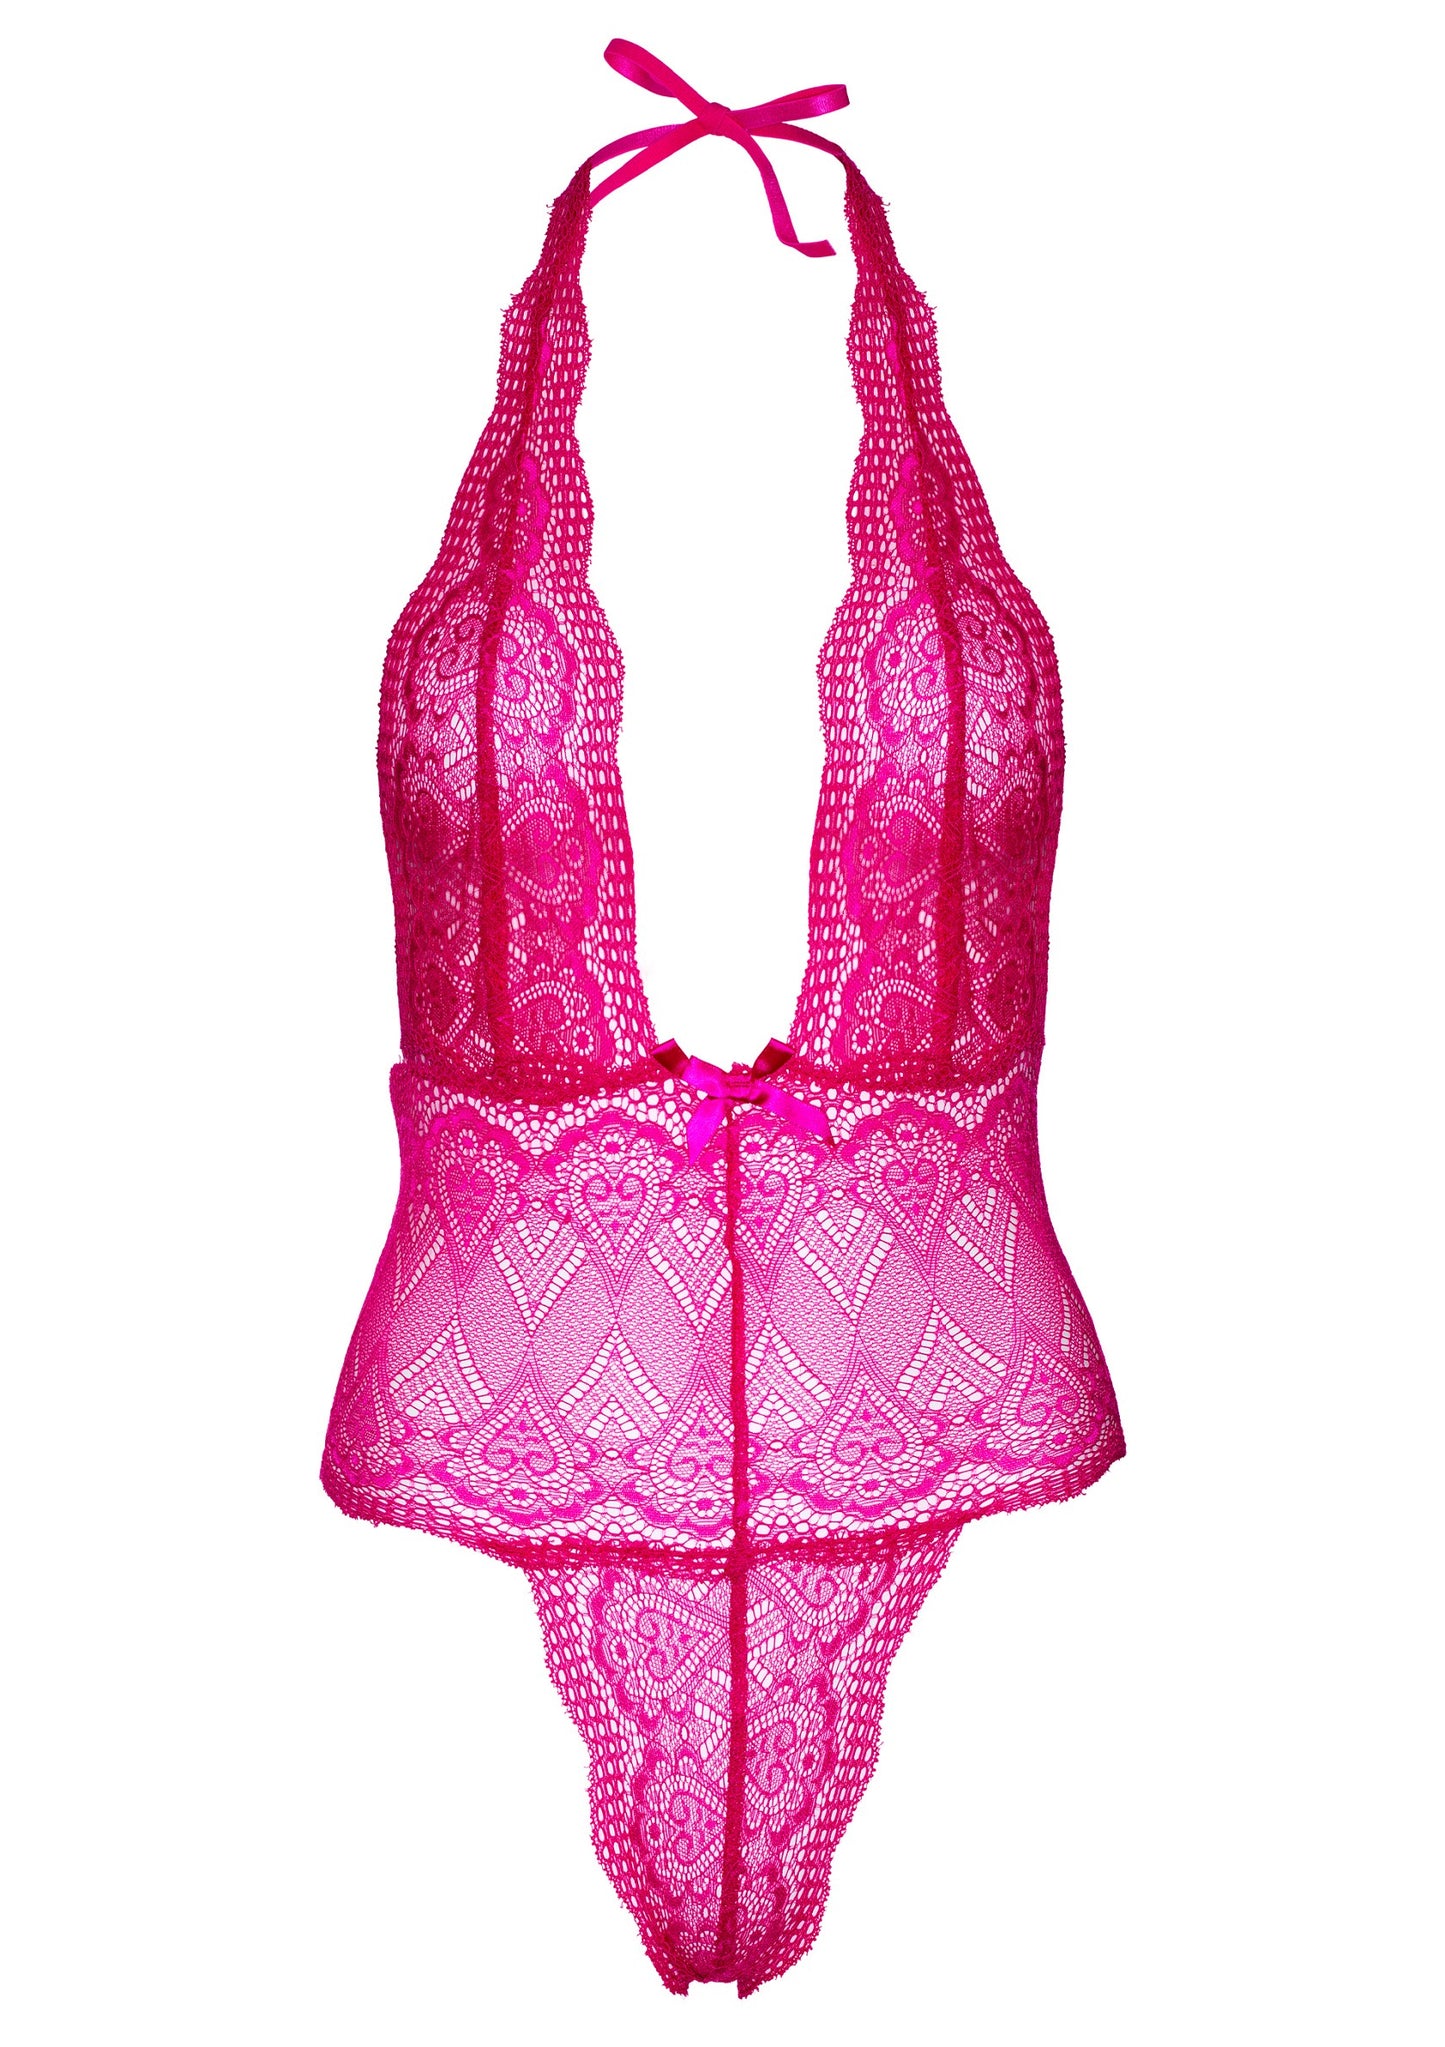 Daring Intimates Heart Lace Teddy PINK S/M - 2